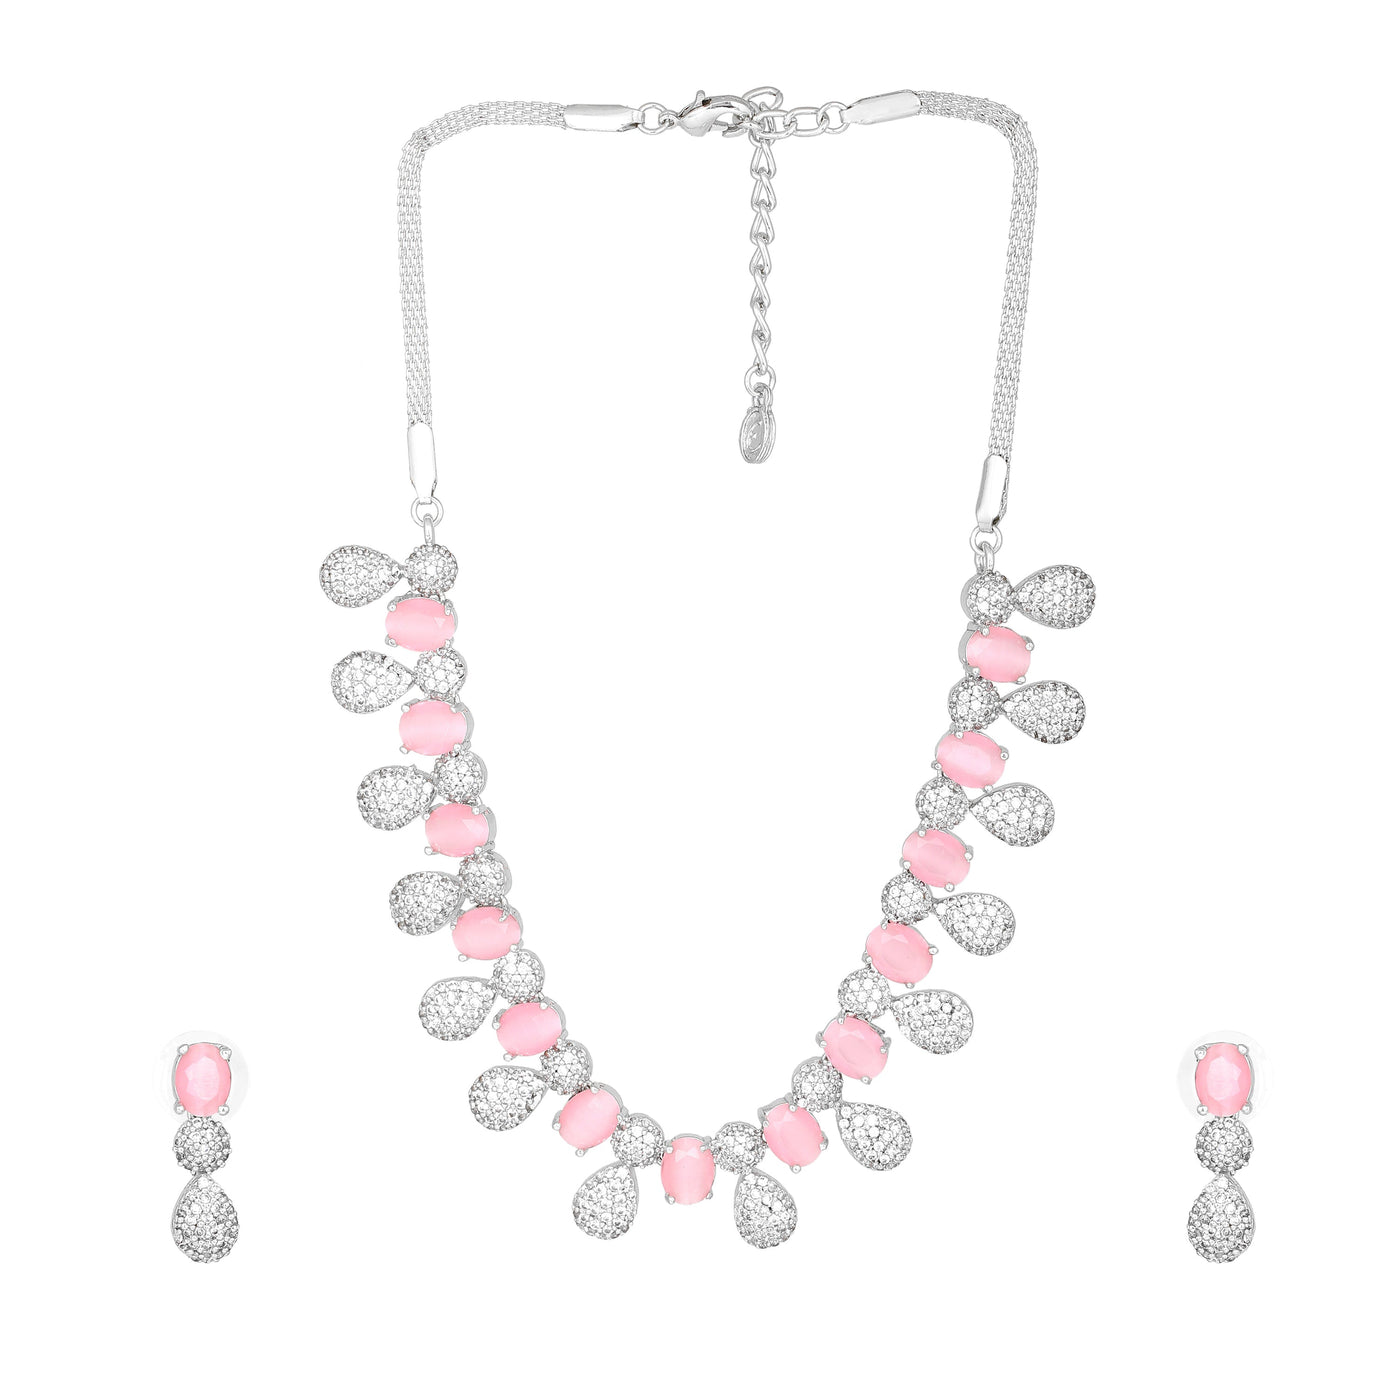 Estele Rhodium Plated Plated CZ Circular Designer Necklace Set with Mint Pink Crystals for Women